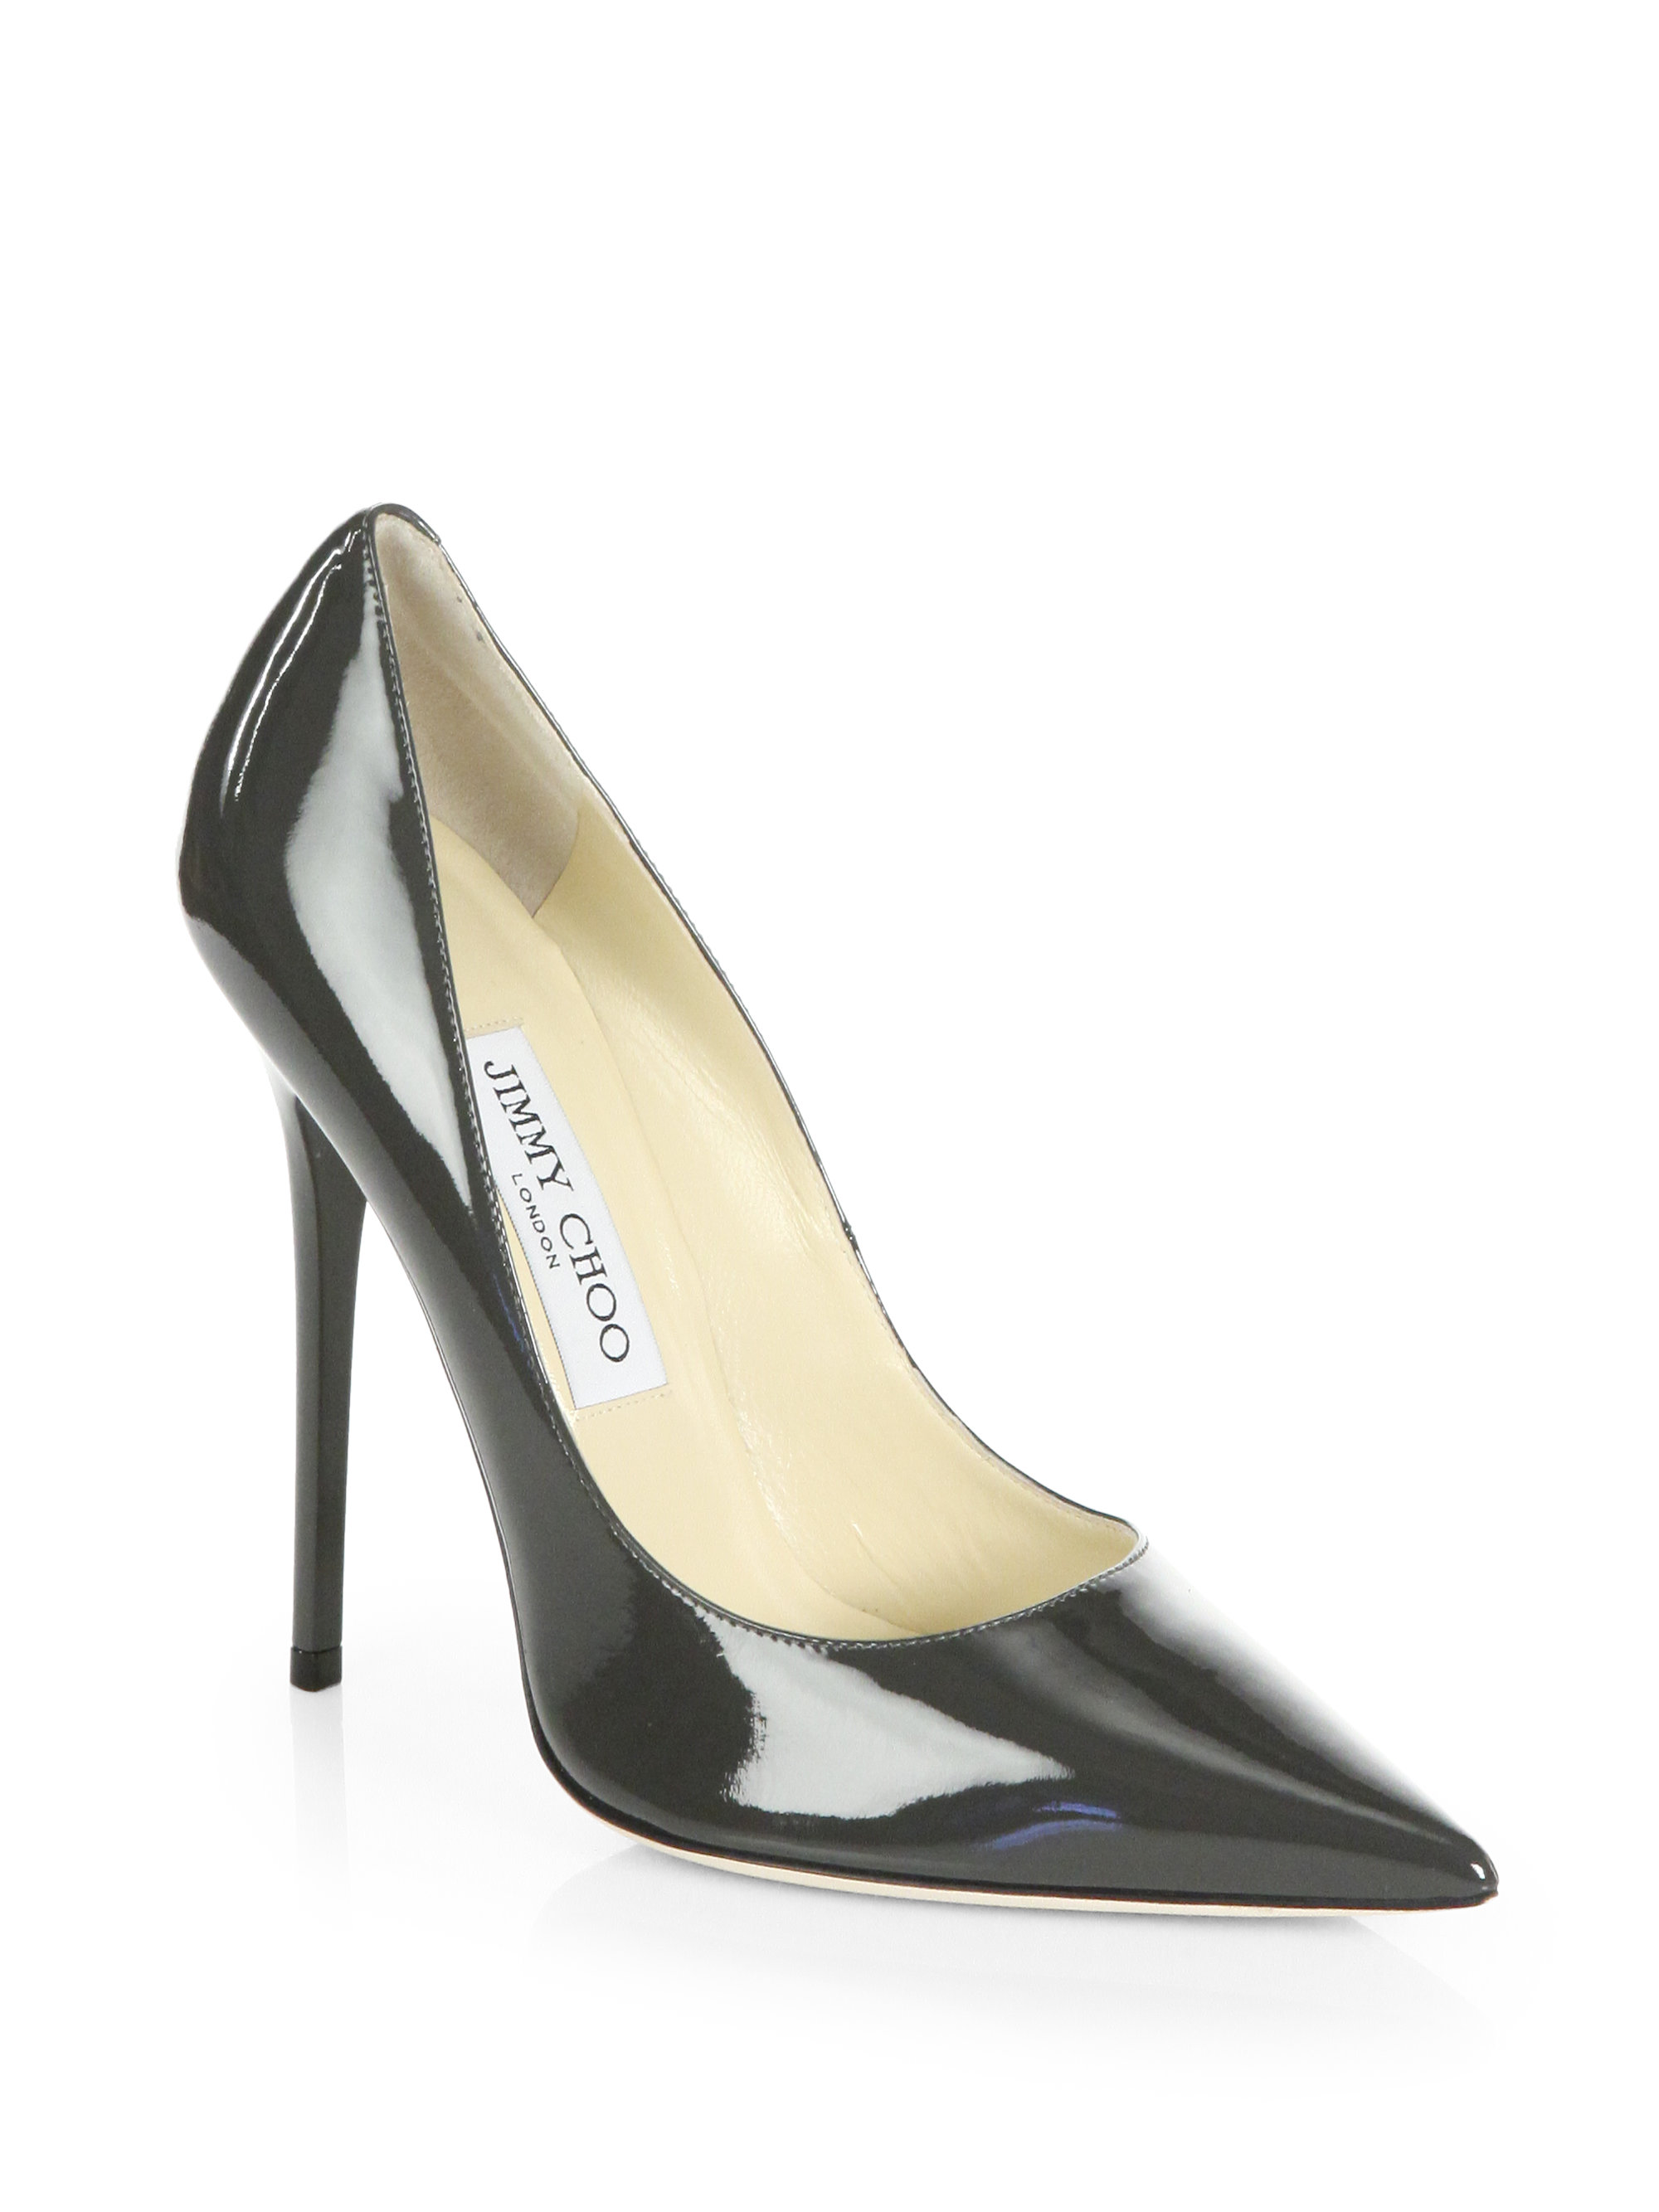 Jimmy choo Anouk Patent Leather Pumps in Black | Lyst